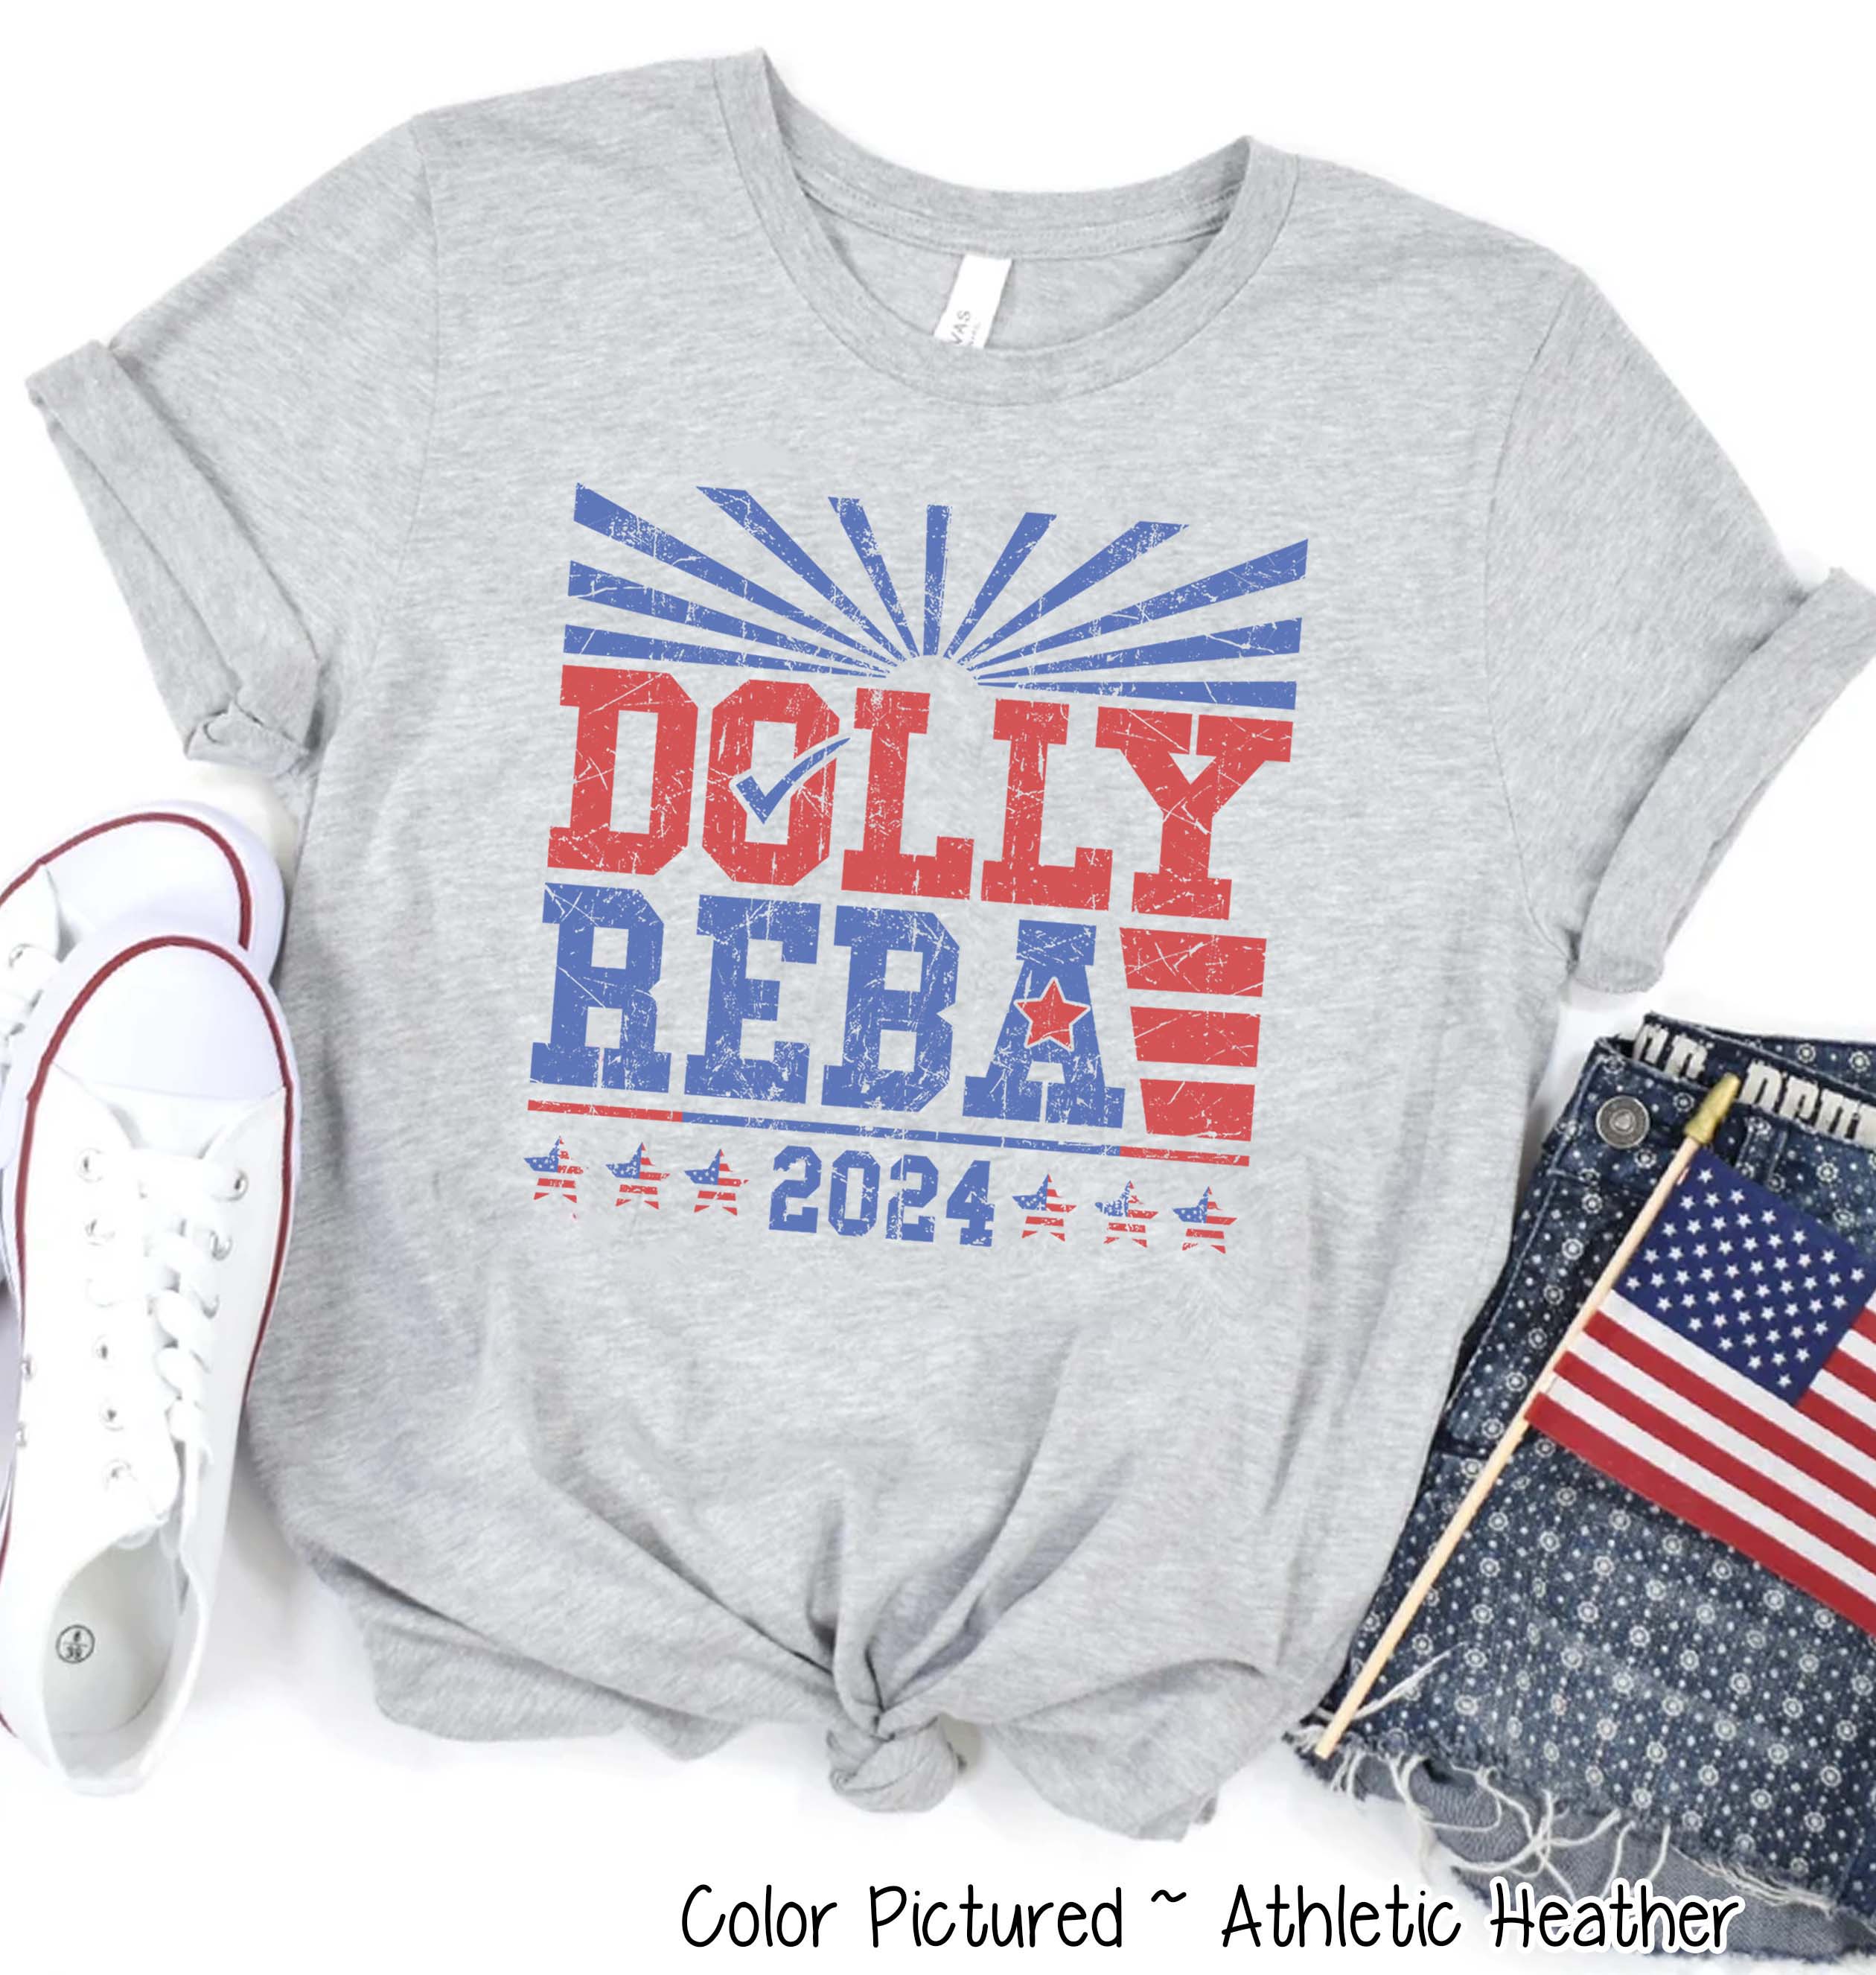 Dolly & Reba for President Funny Political Tee and Sweatshirt